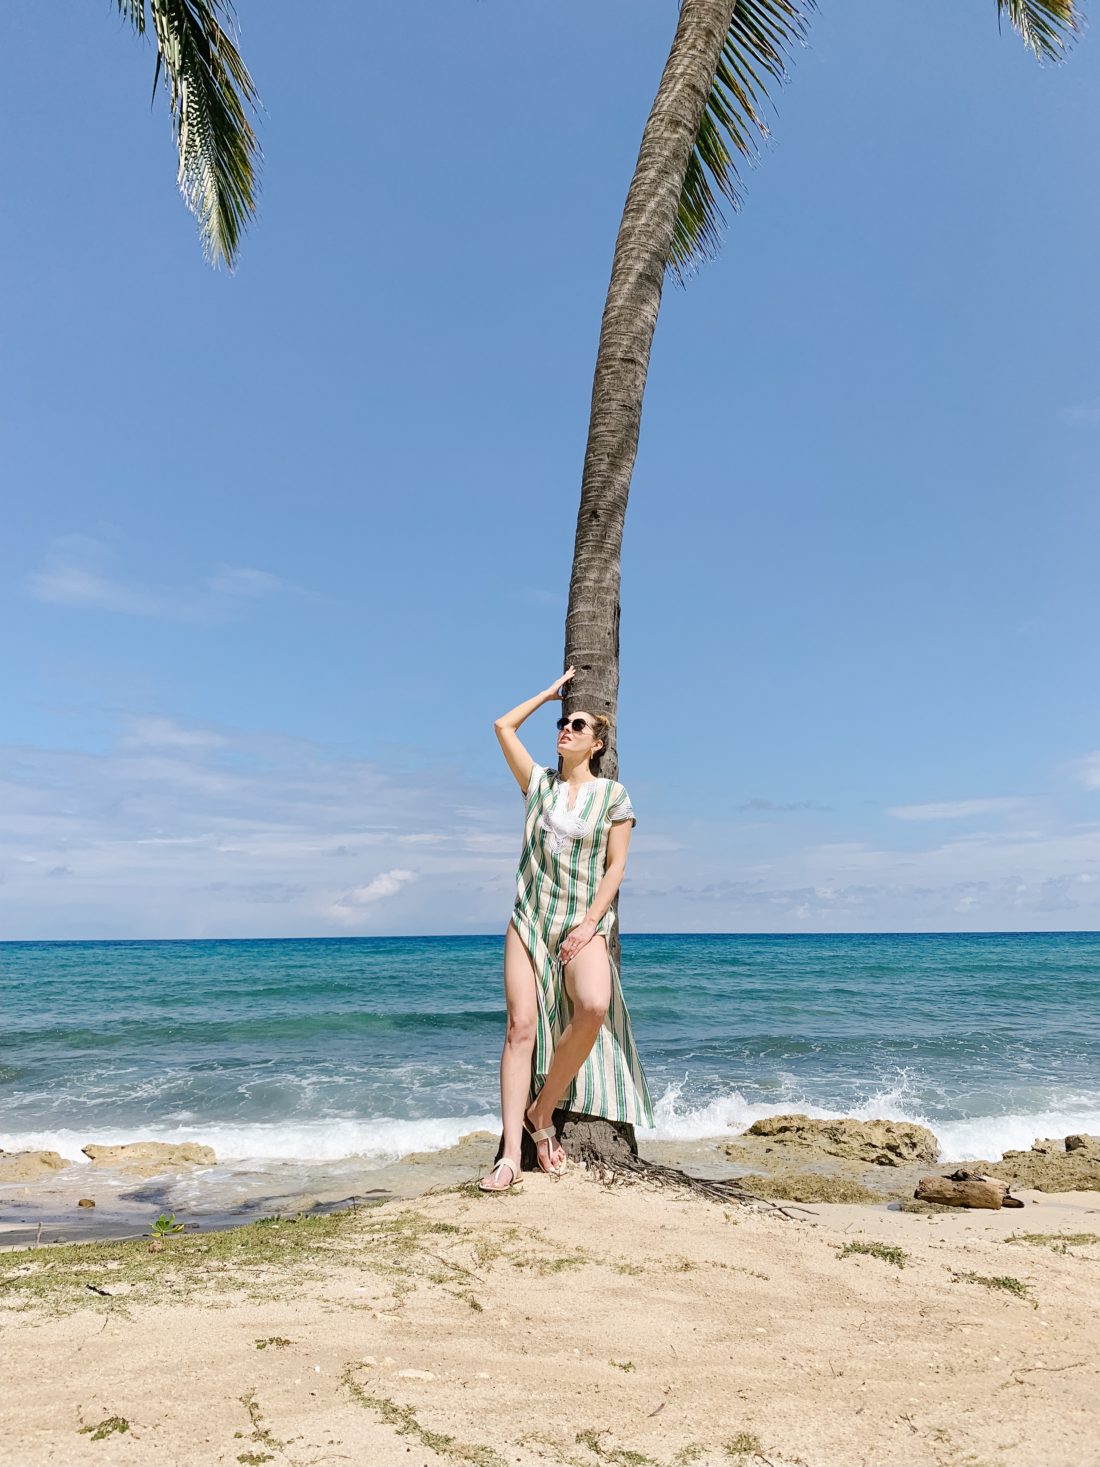 Eva Amurri Martino of Happily Eva After wears a Tory Burch striped bathing suit on her family trip to Jamaica